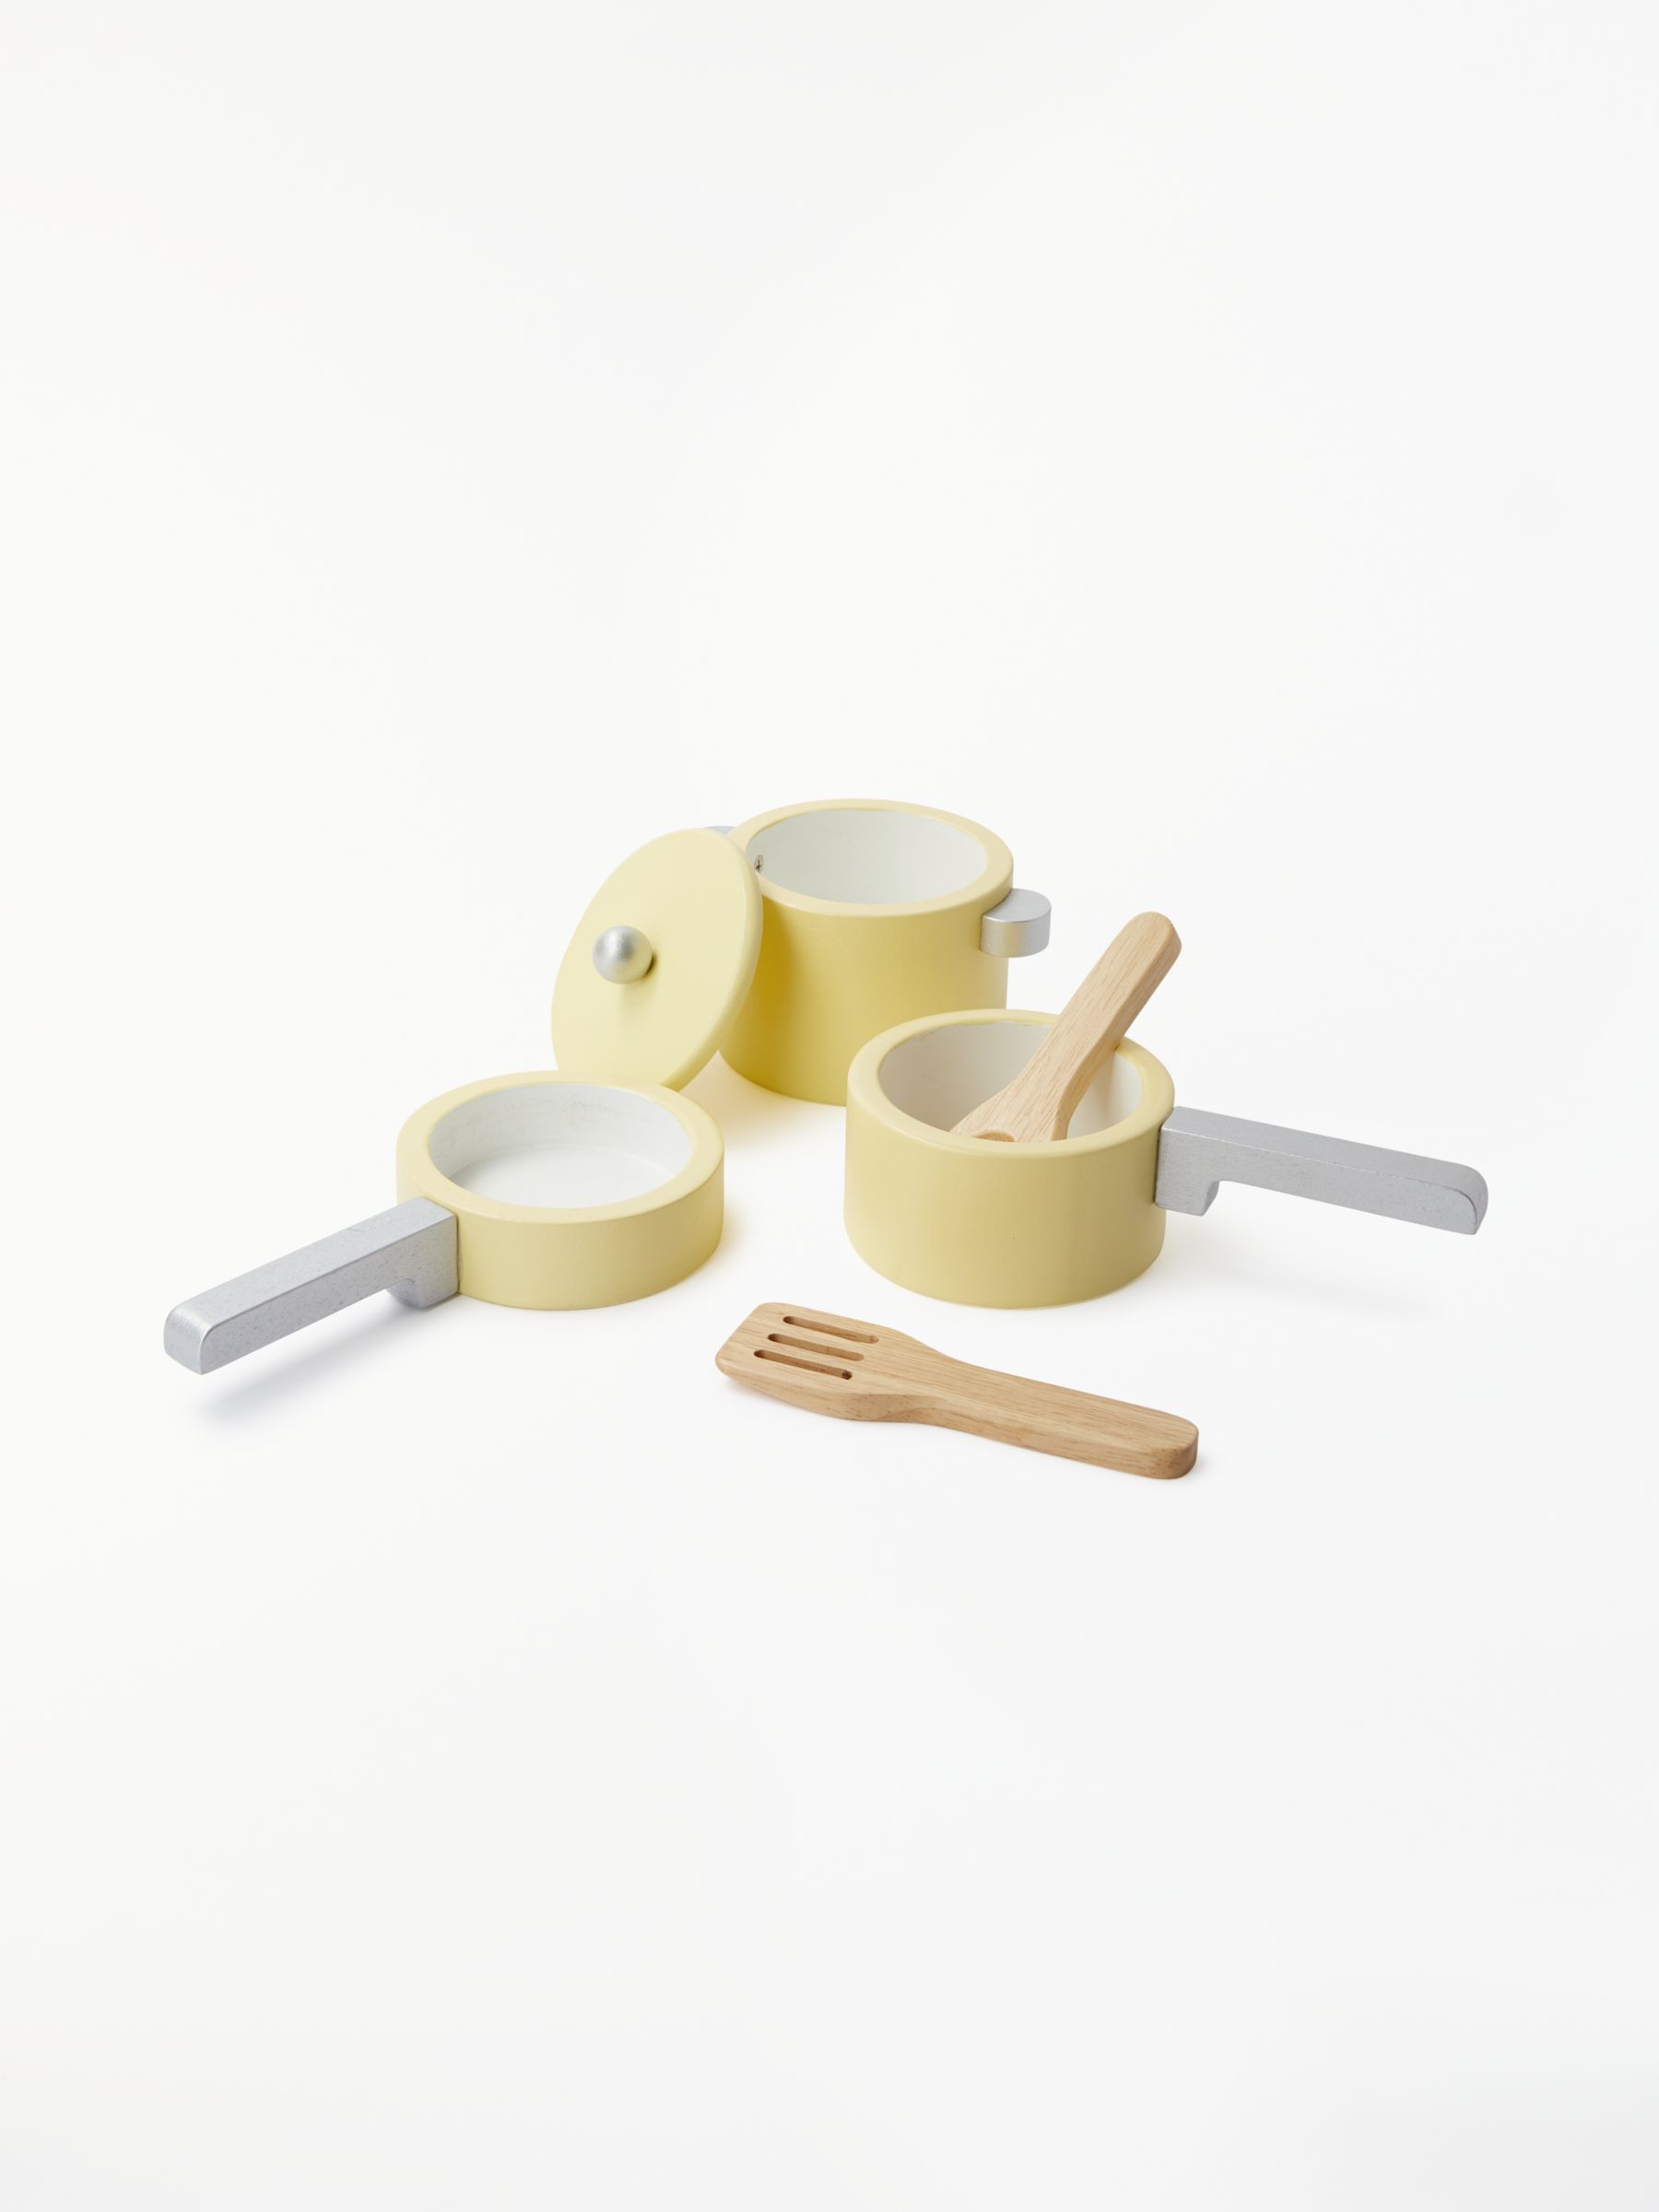 childrens wooden pots and pans